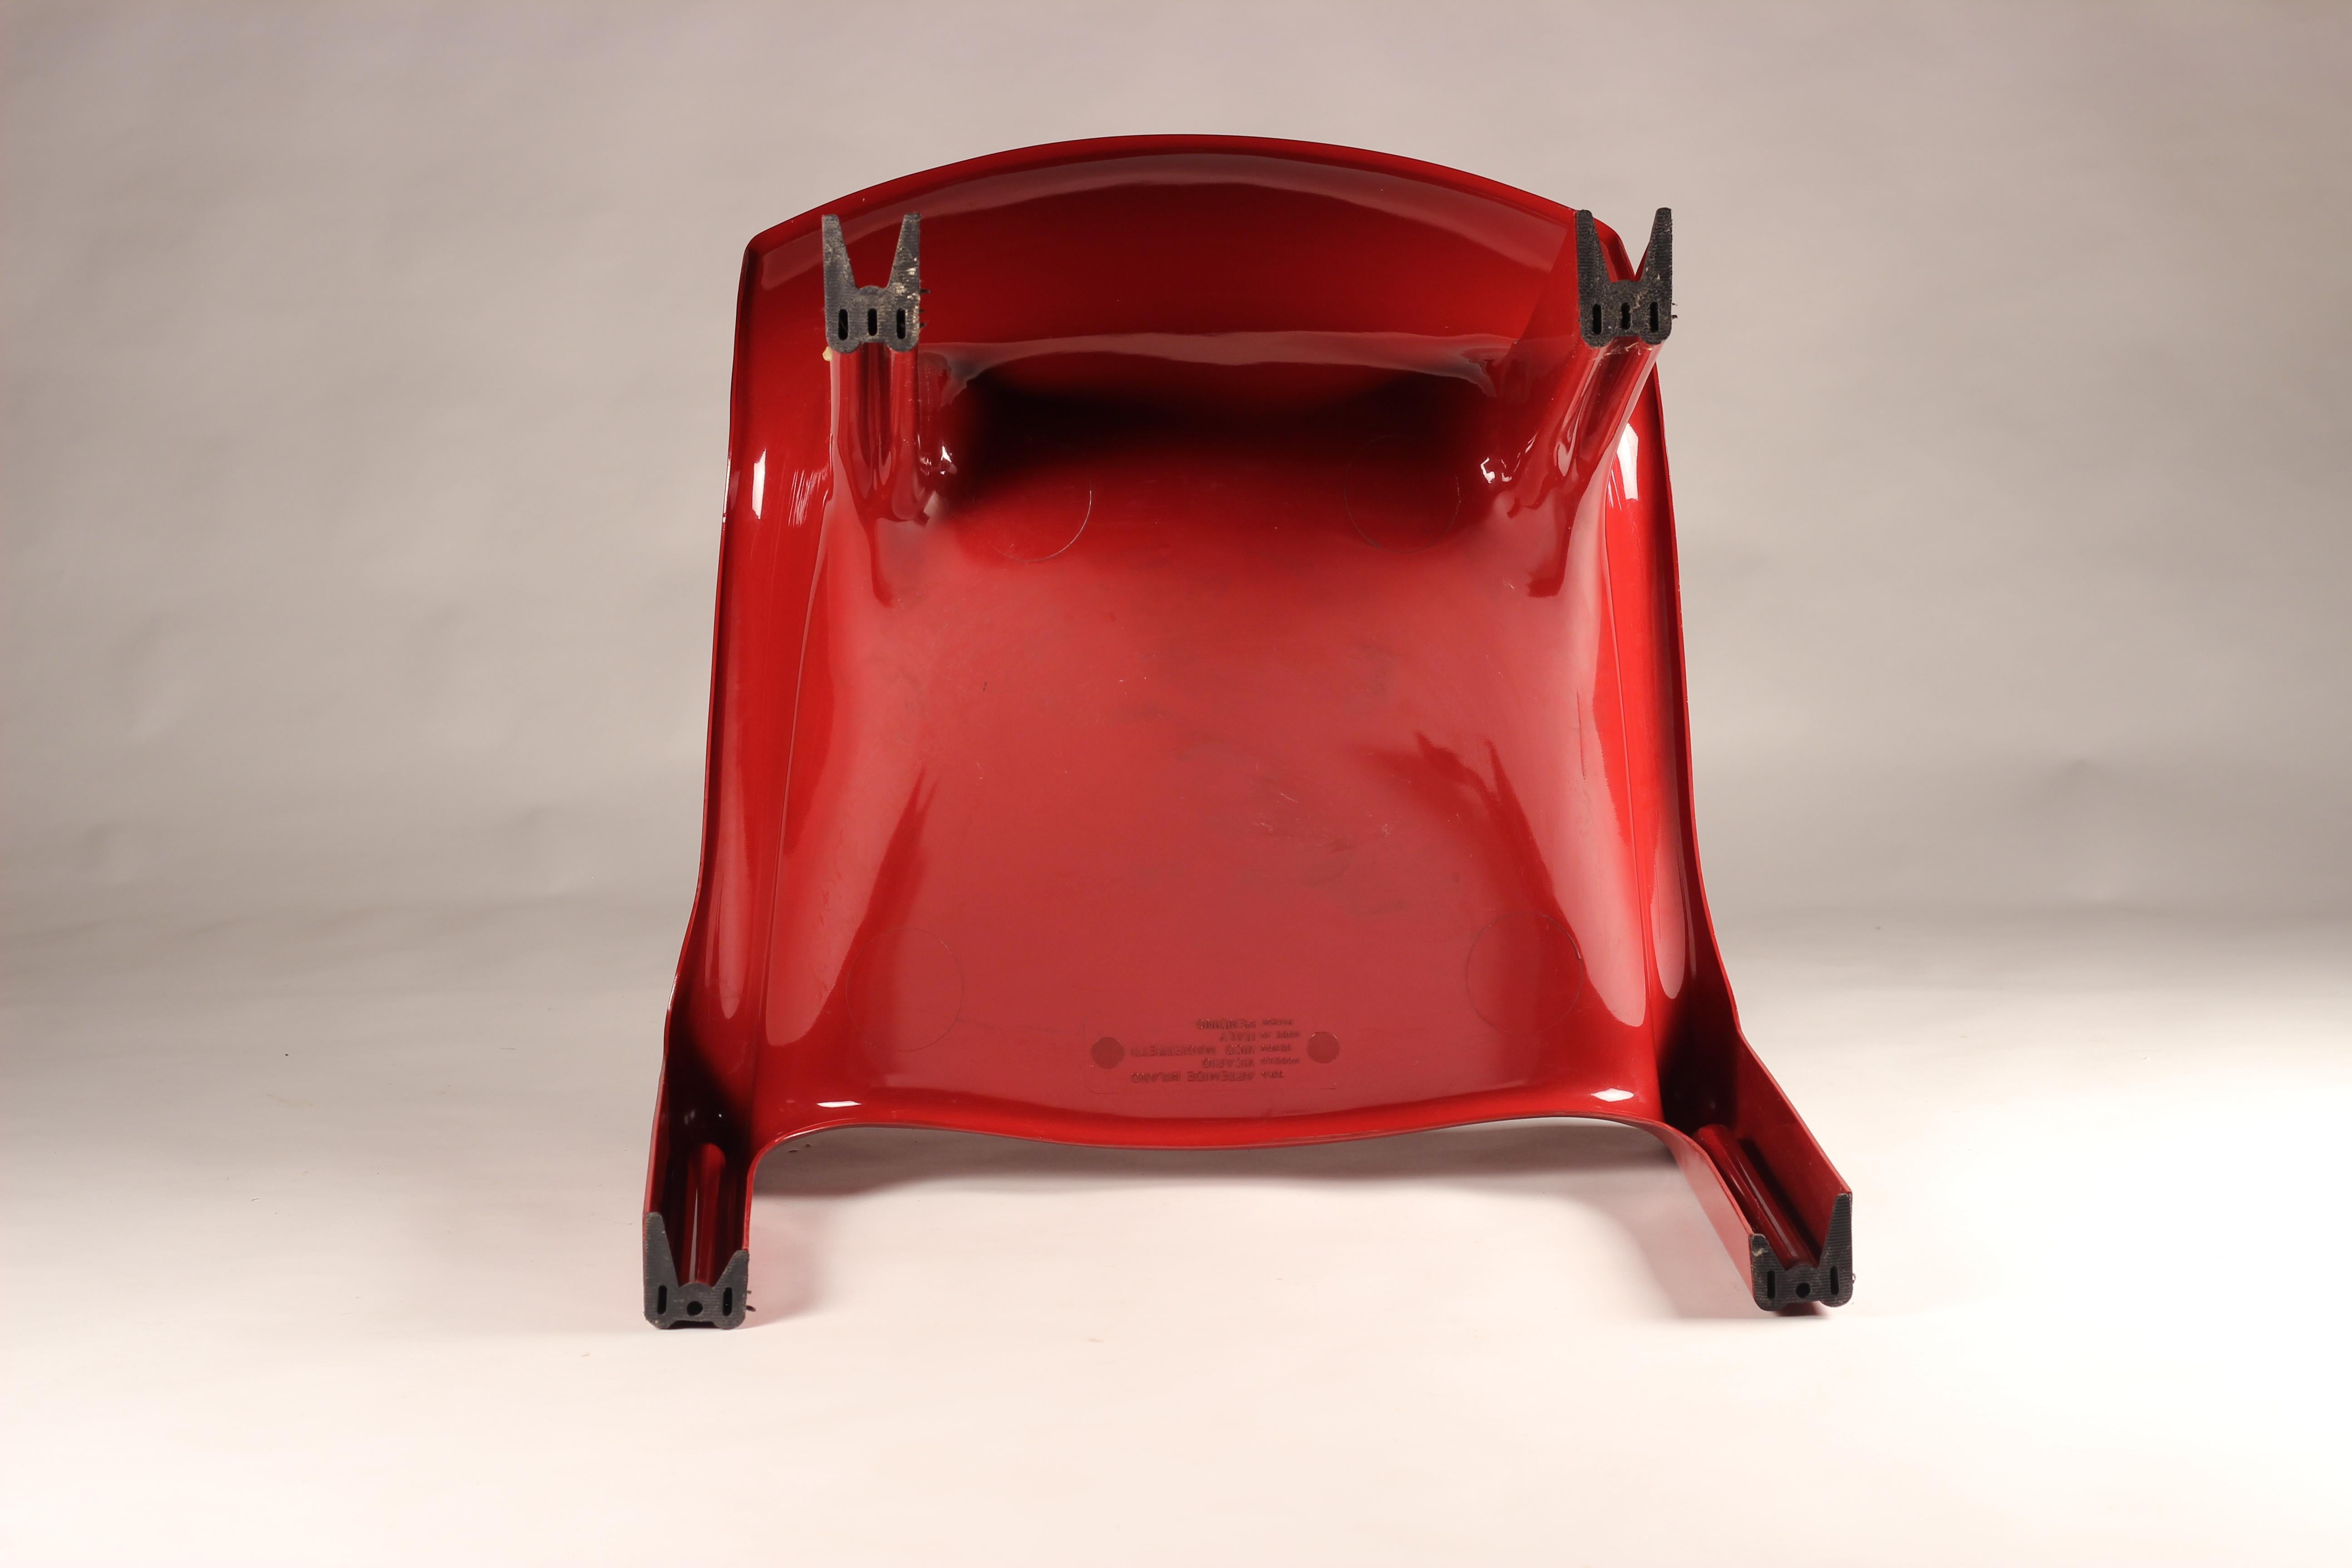 Late 20th Century Red Original Lounge Chair Vicario Designed by Vico Magistretti Made by Artemide